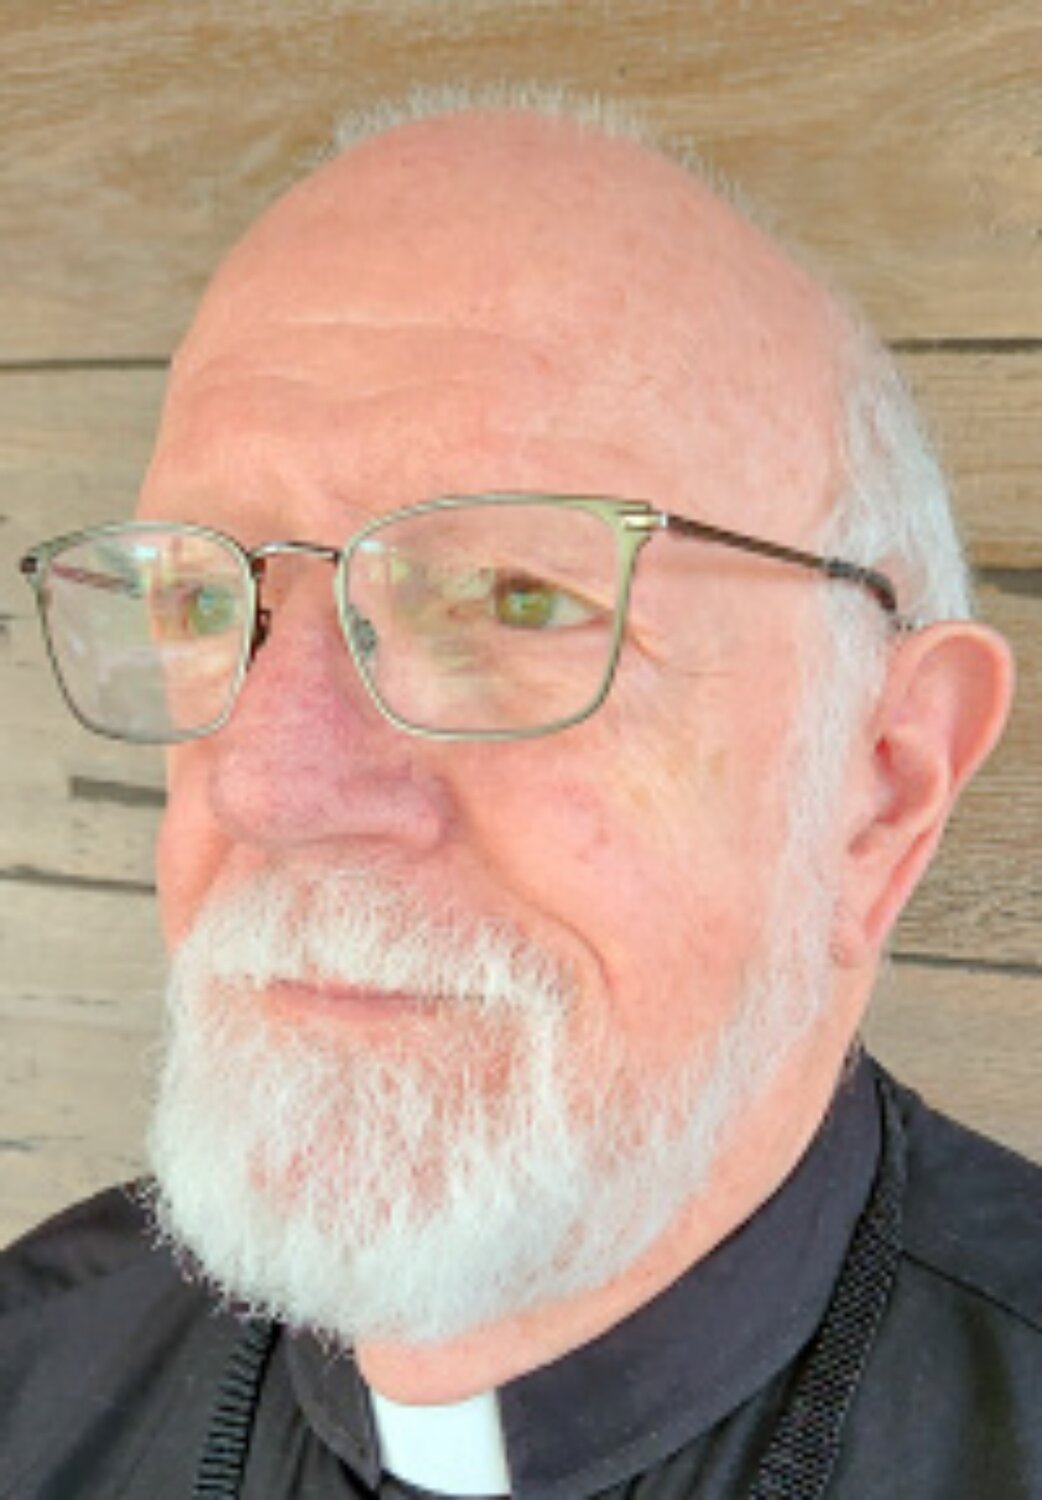 This Speakout was written by the Rev. Larry Ort, retired Episcopal priest